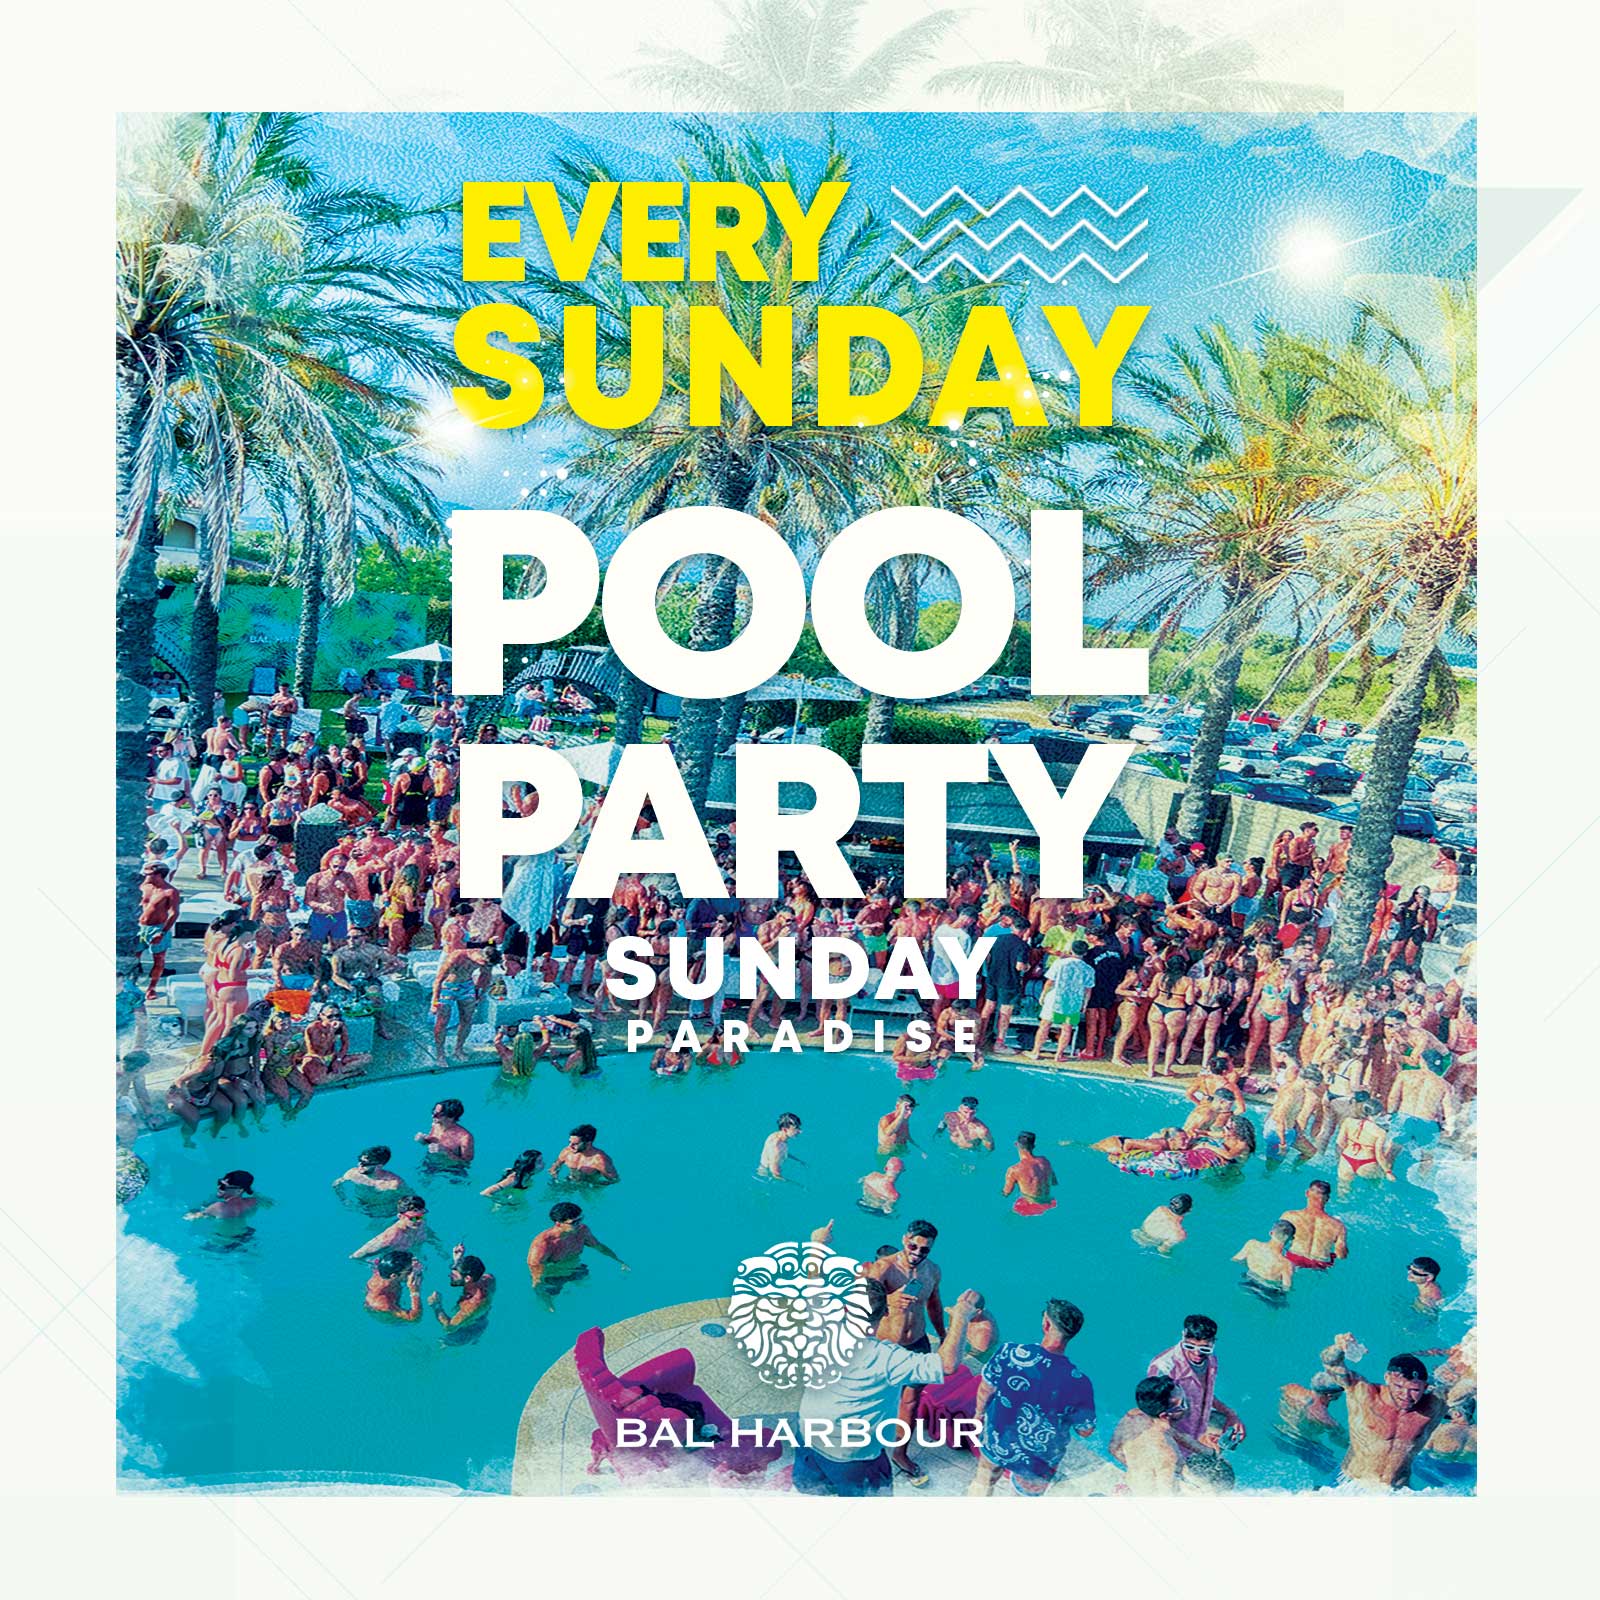 sunday paradise pool party Bal Harbour